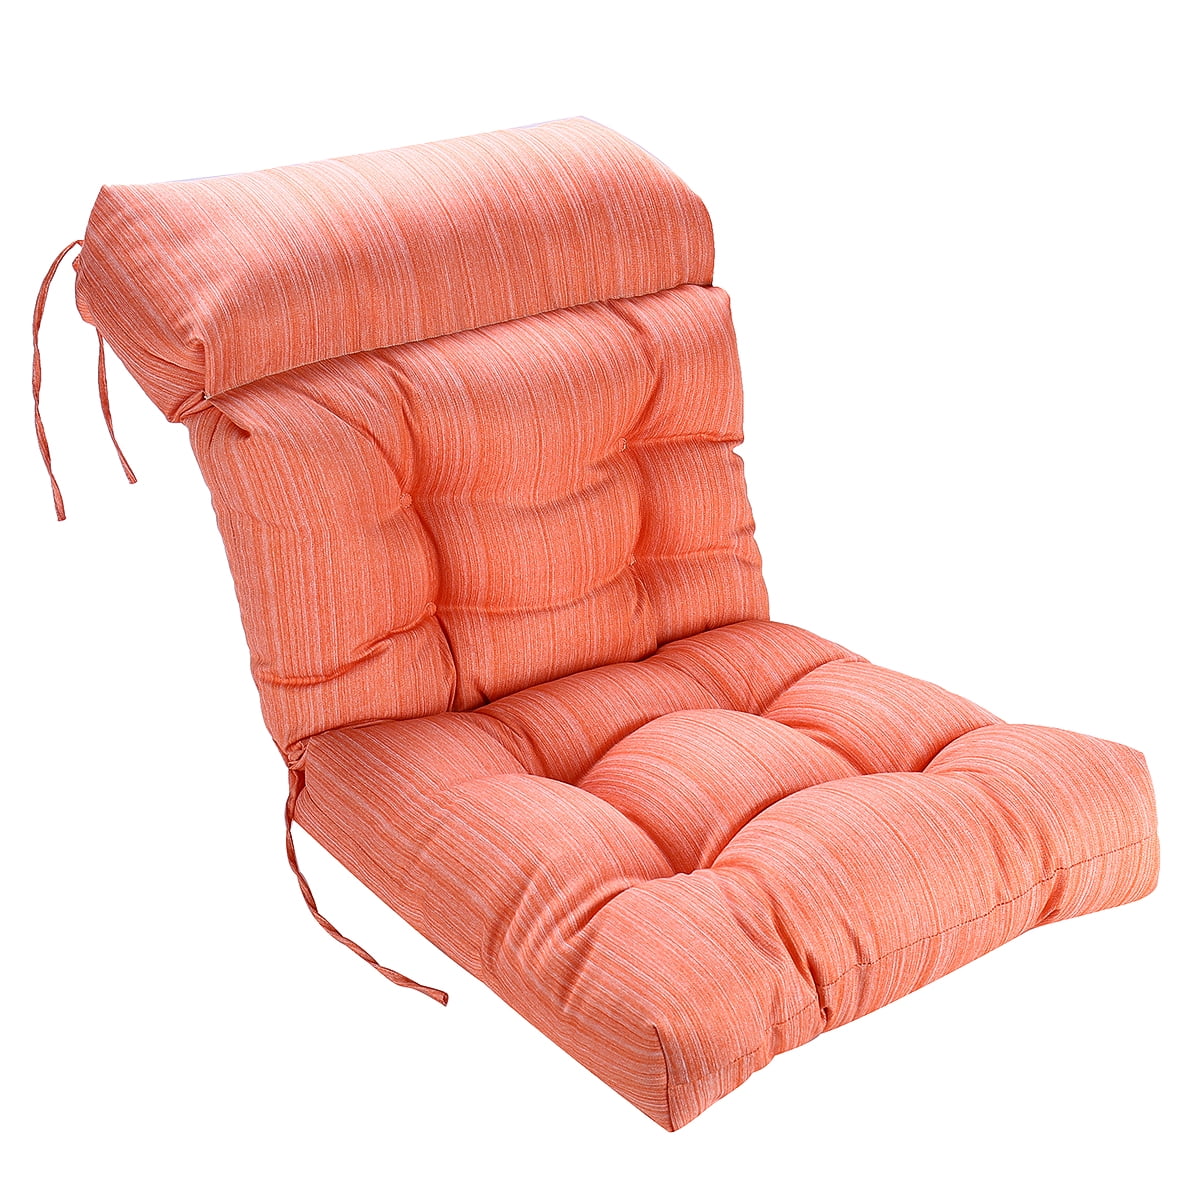 Replacing Your Outdoor Cushions